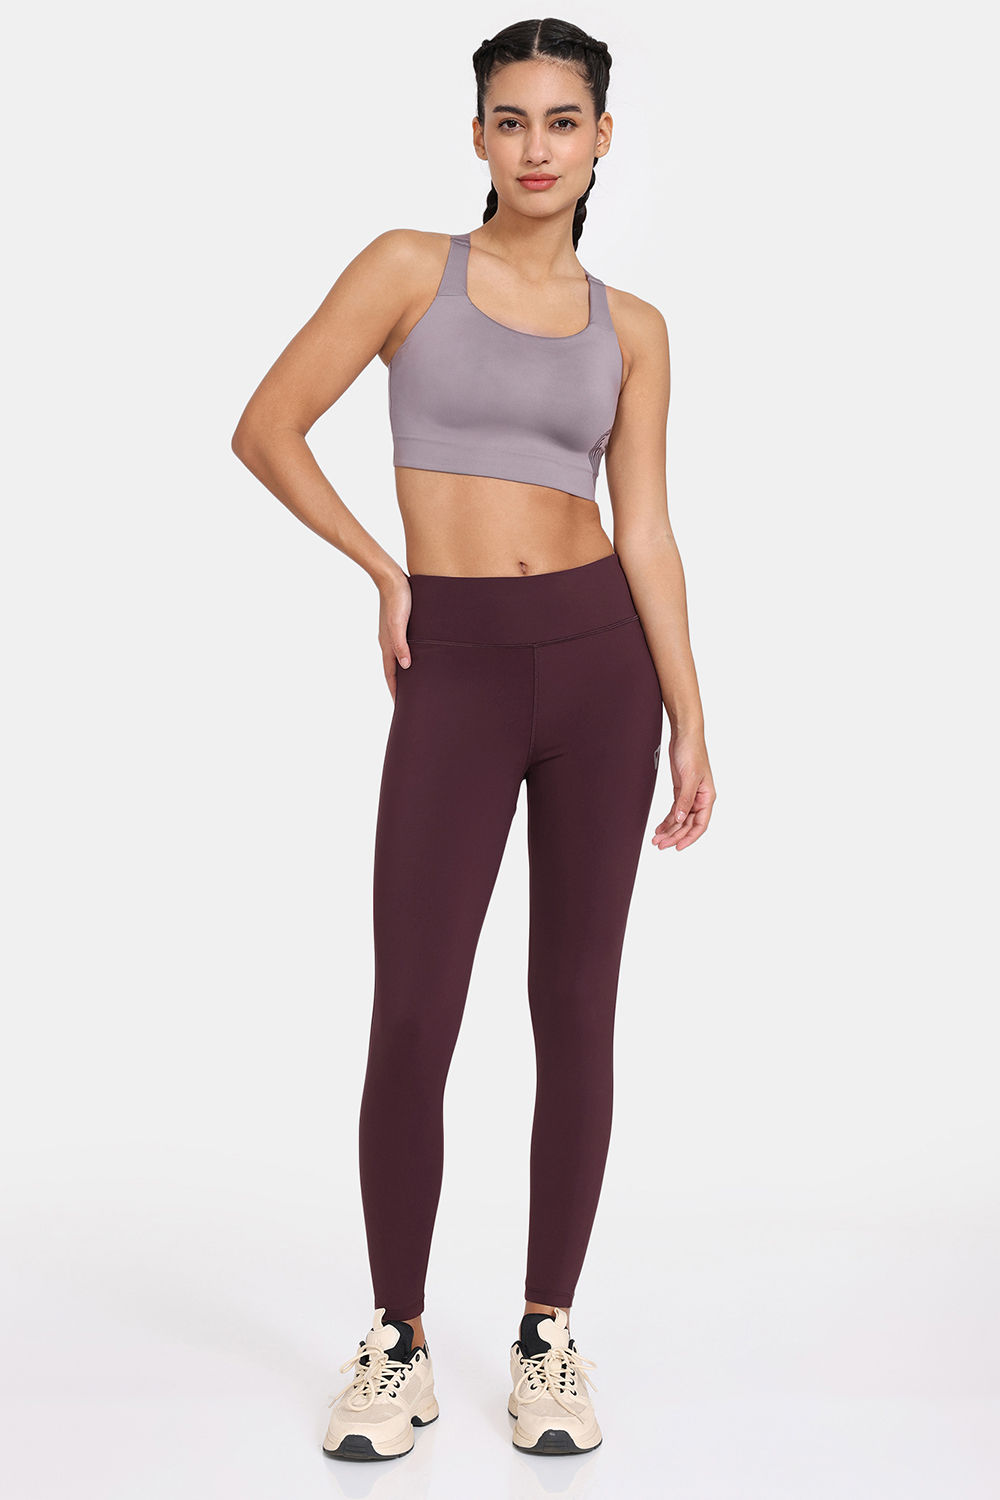 Buy Zelocity High Impact Quick Dry Sports Bra With High Rise Leggings - Purple Burgundy